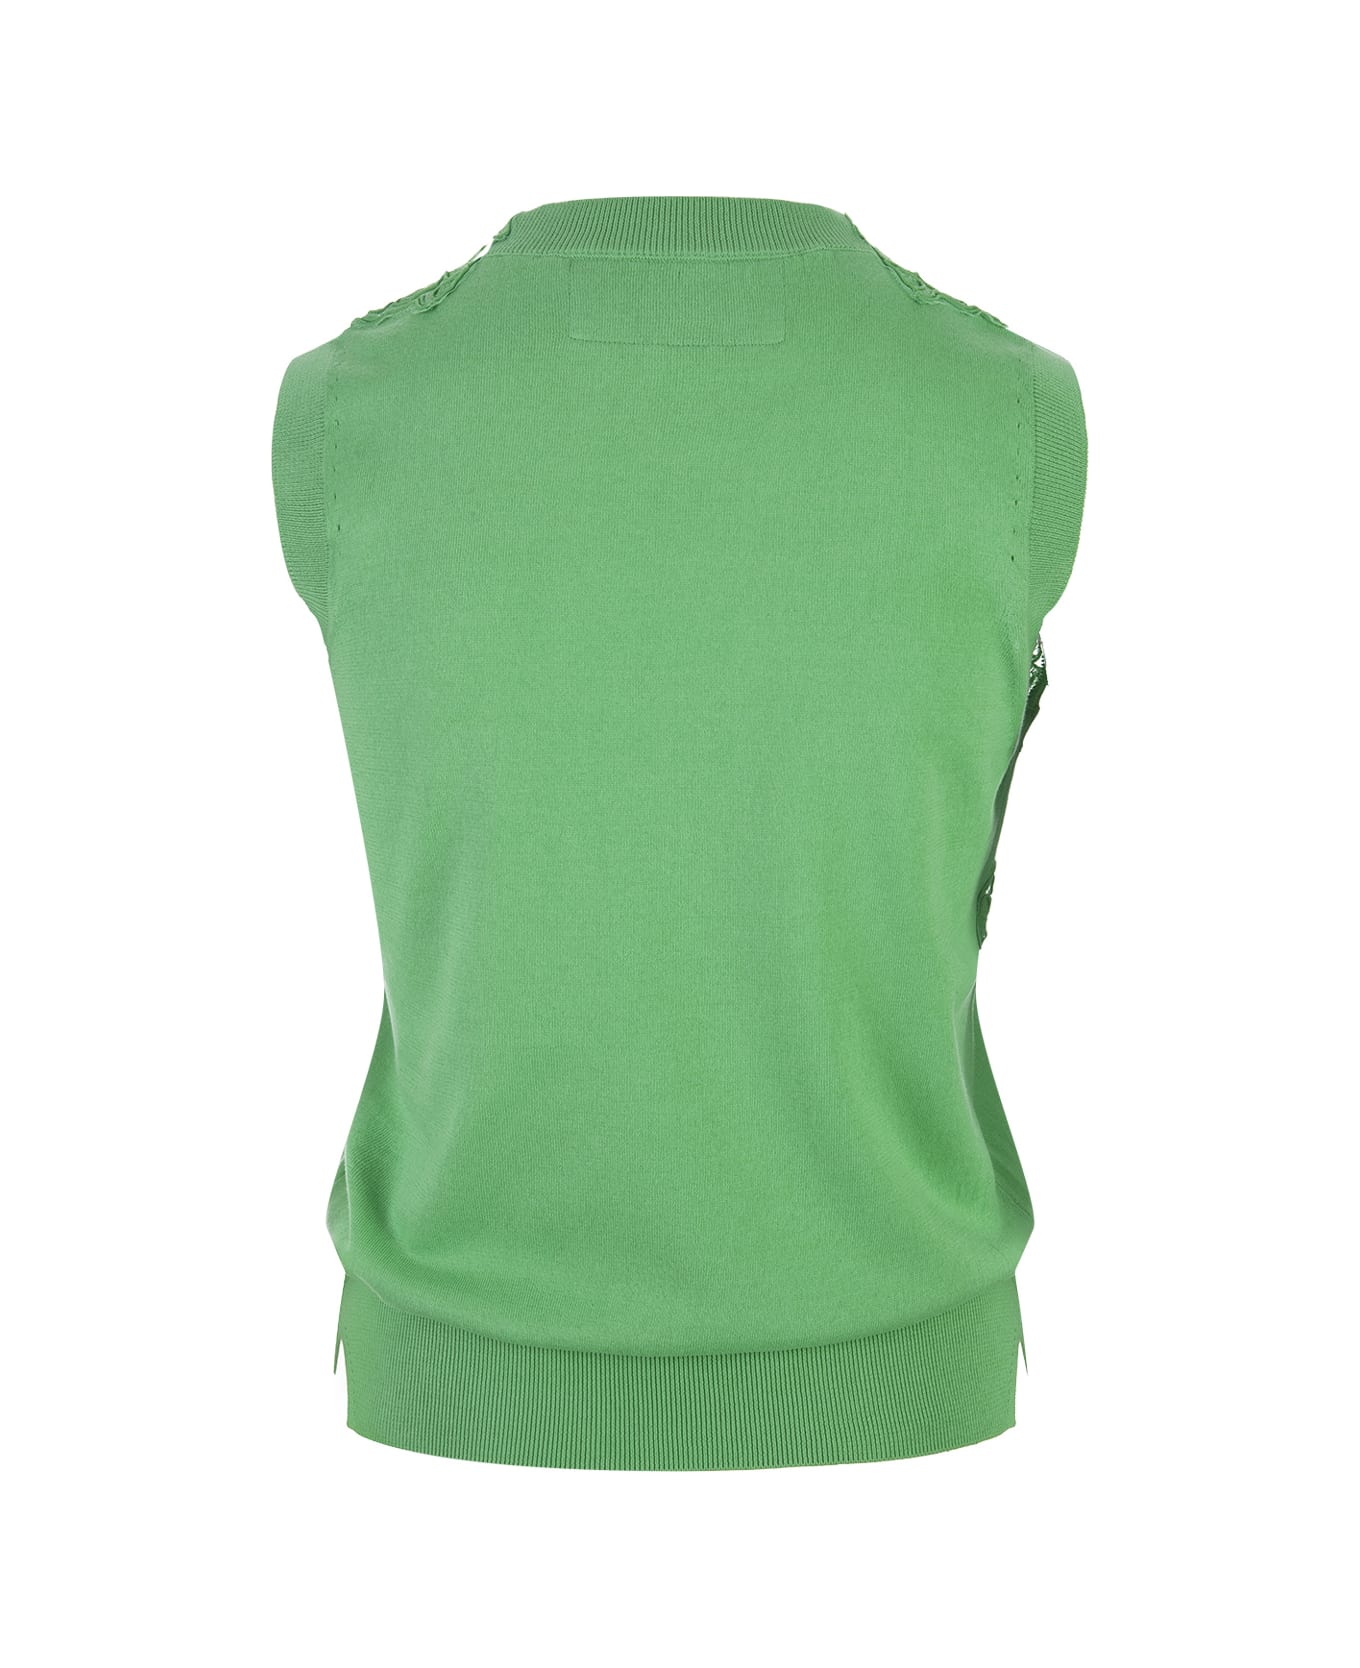 Ermanno Scervino Green Knitted Sleeveless Top With Lace - Green